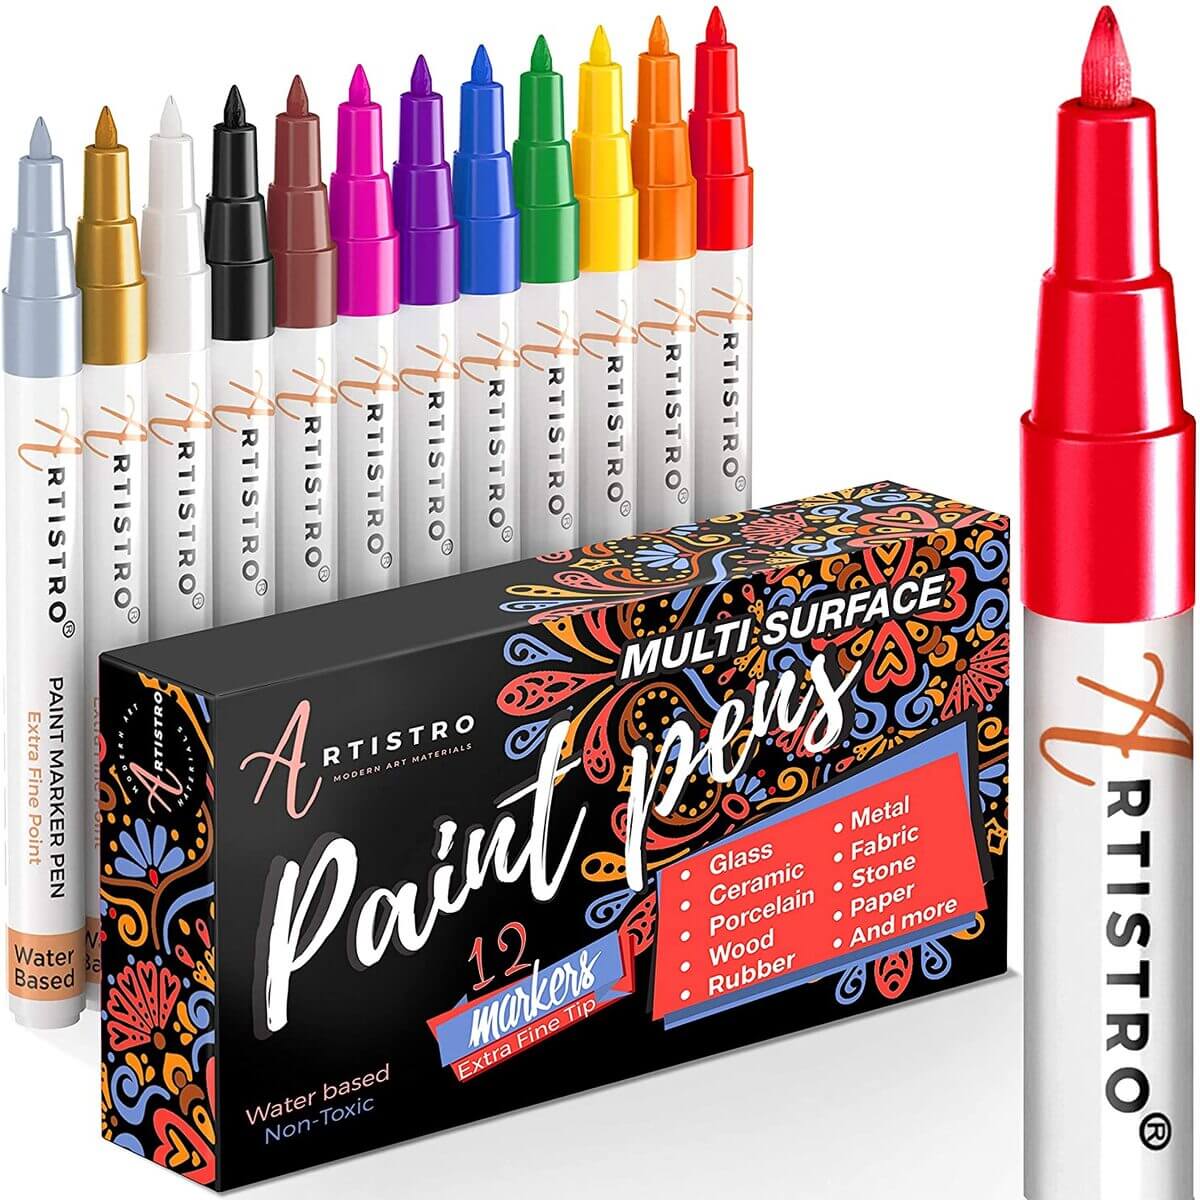 ARTISTRO PAINT PENS ON CERAMICS  ARE THEY BEST MULTI SURFACE MARKERS ? 